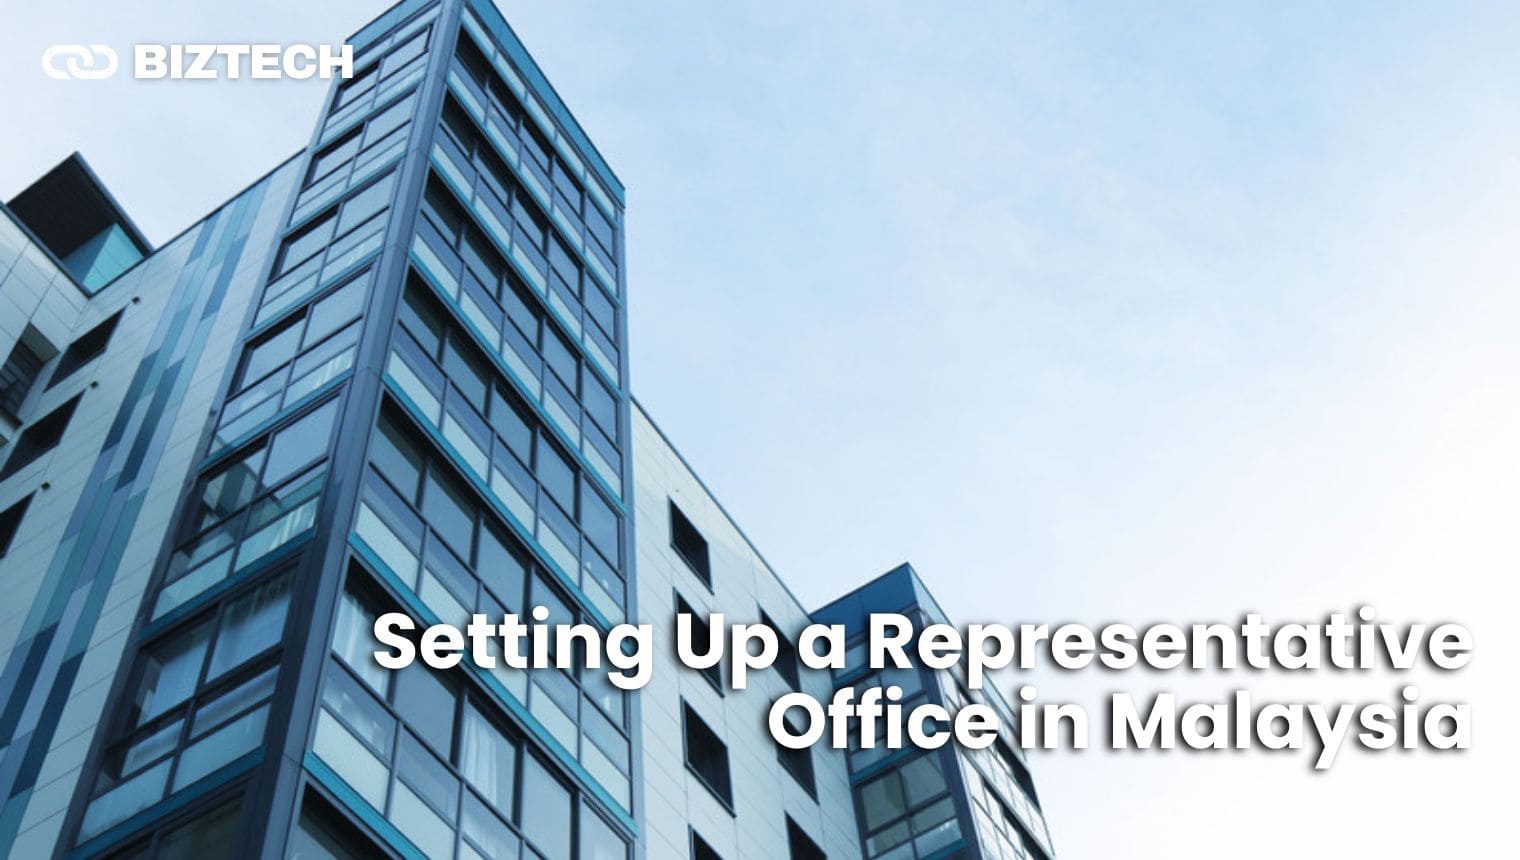 Guidelines for Setting Up a Representative Office in Malaysia